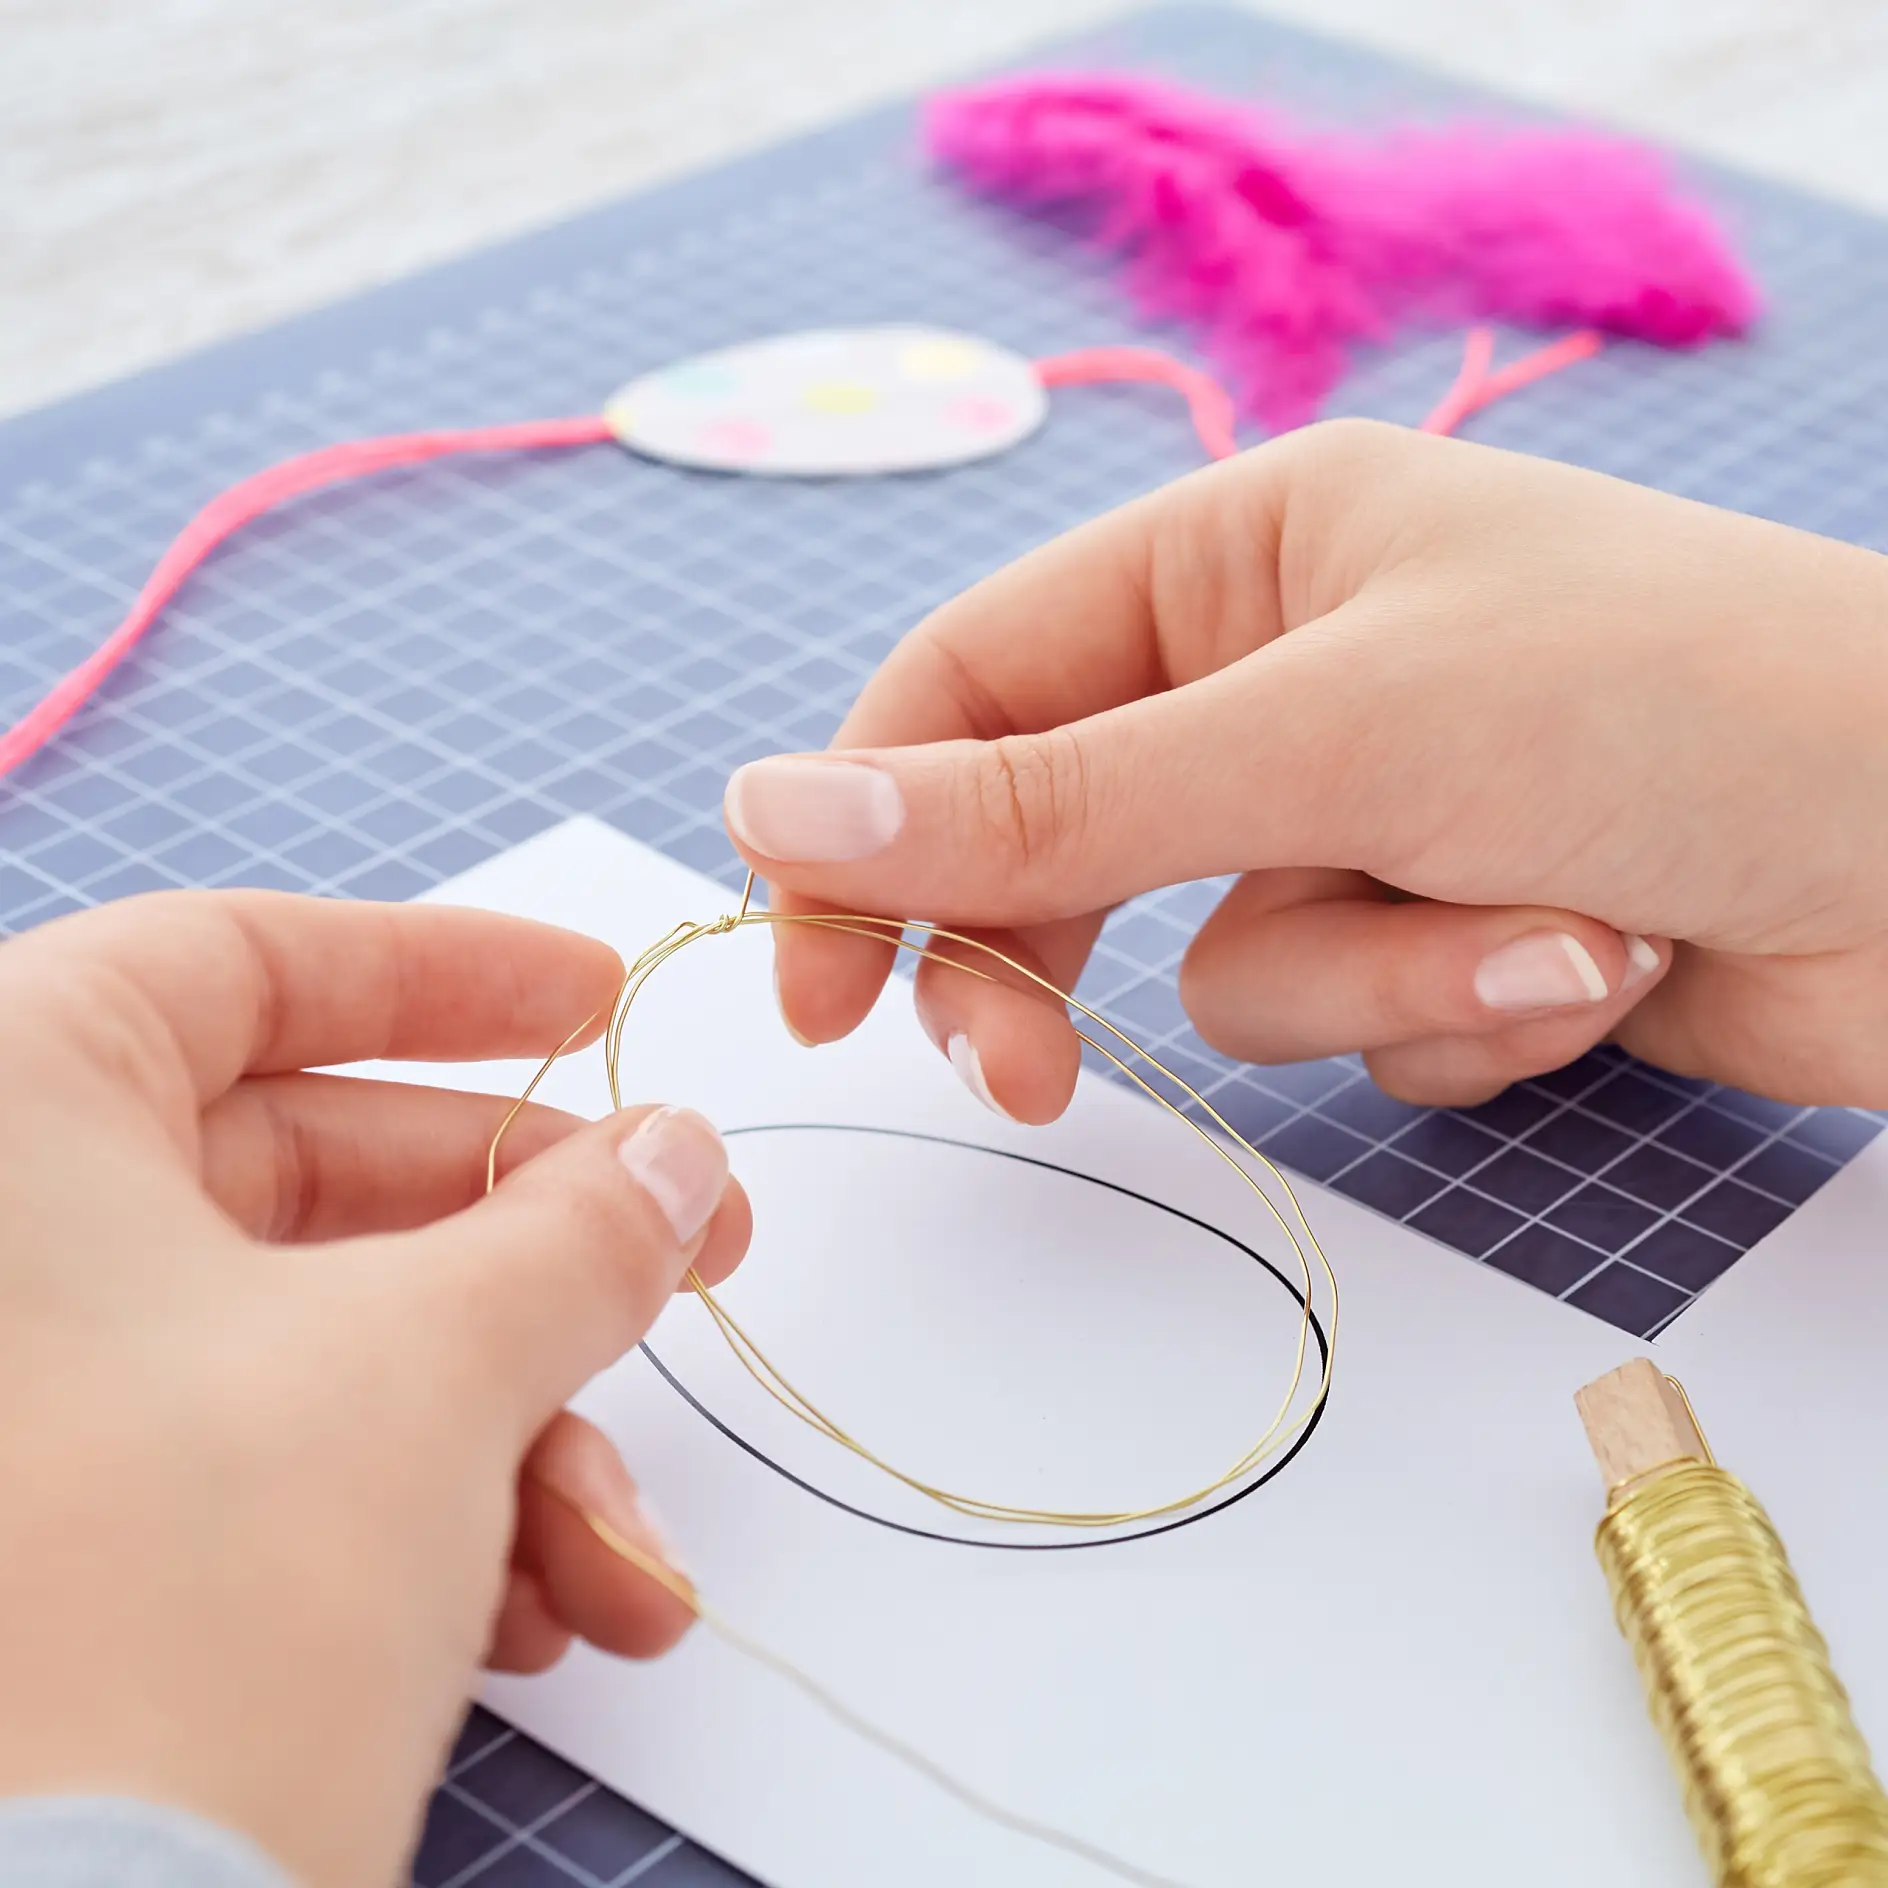 Using the larger template, shape the wire into an egg: Put the wire two times around the shape, starting at the top, cut off the wire and twist the ends together.